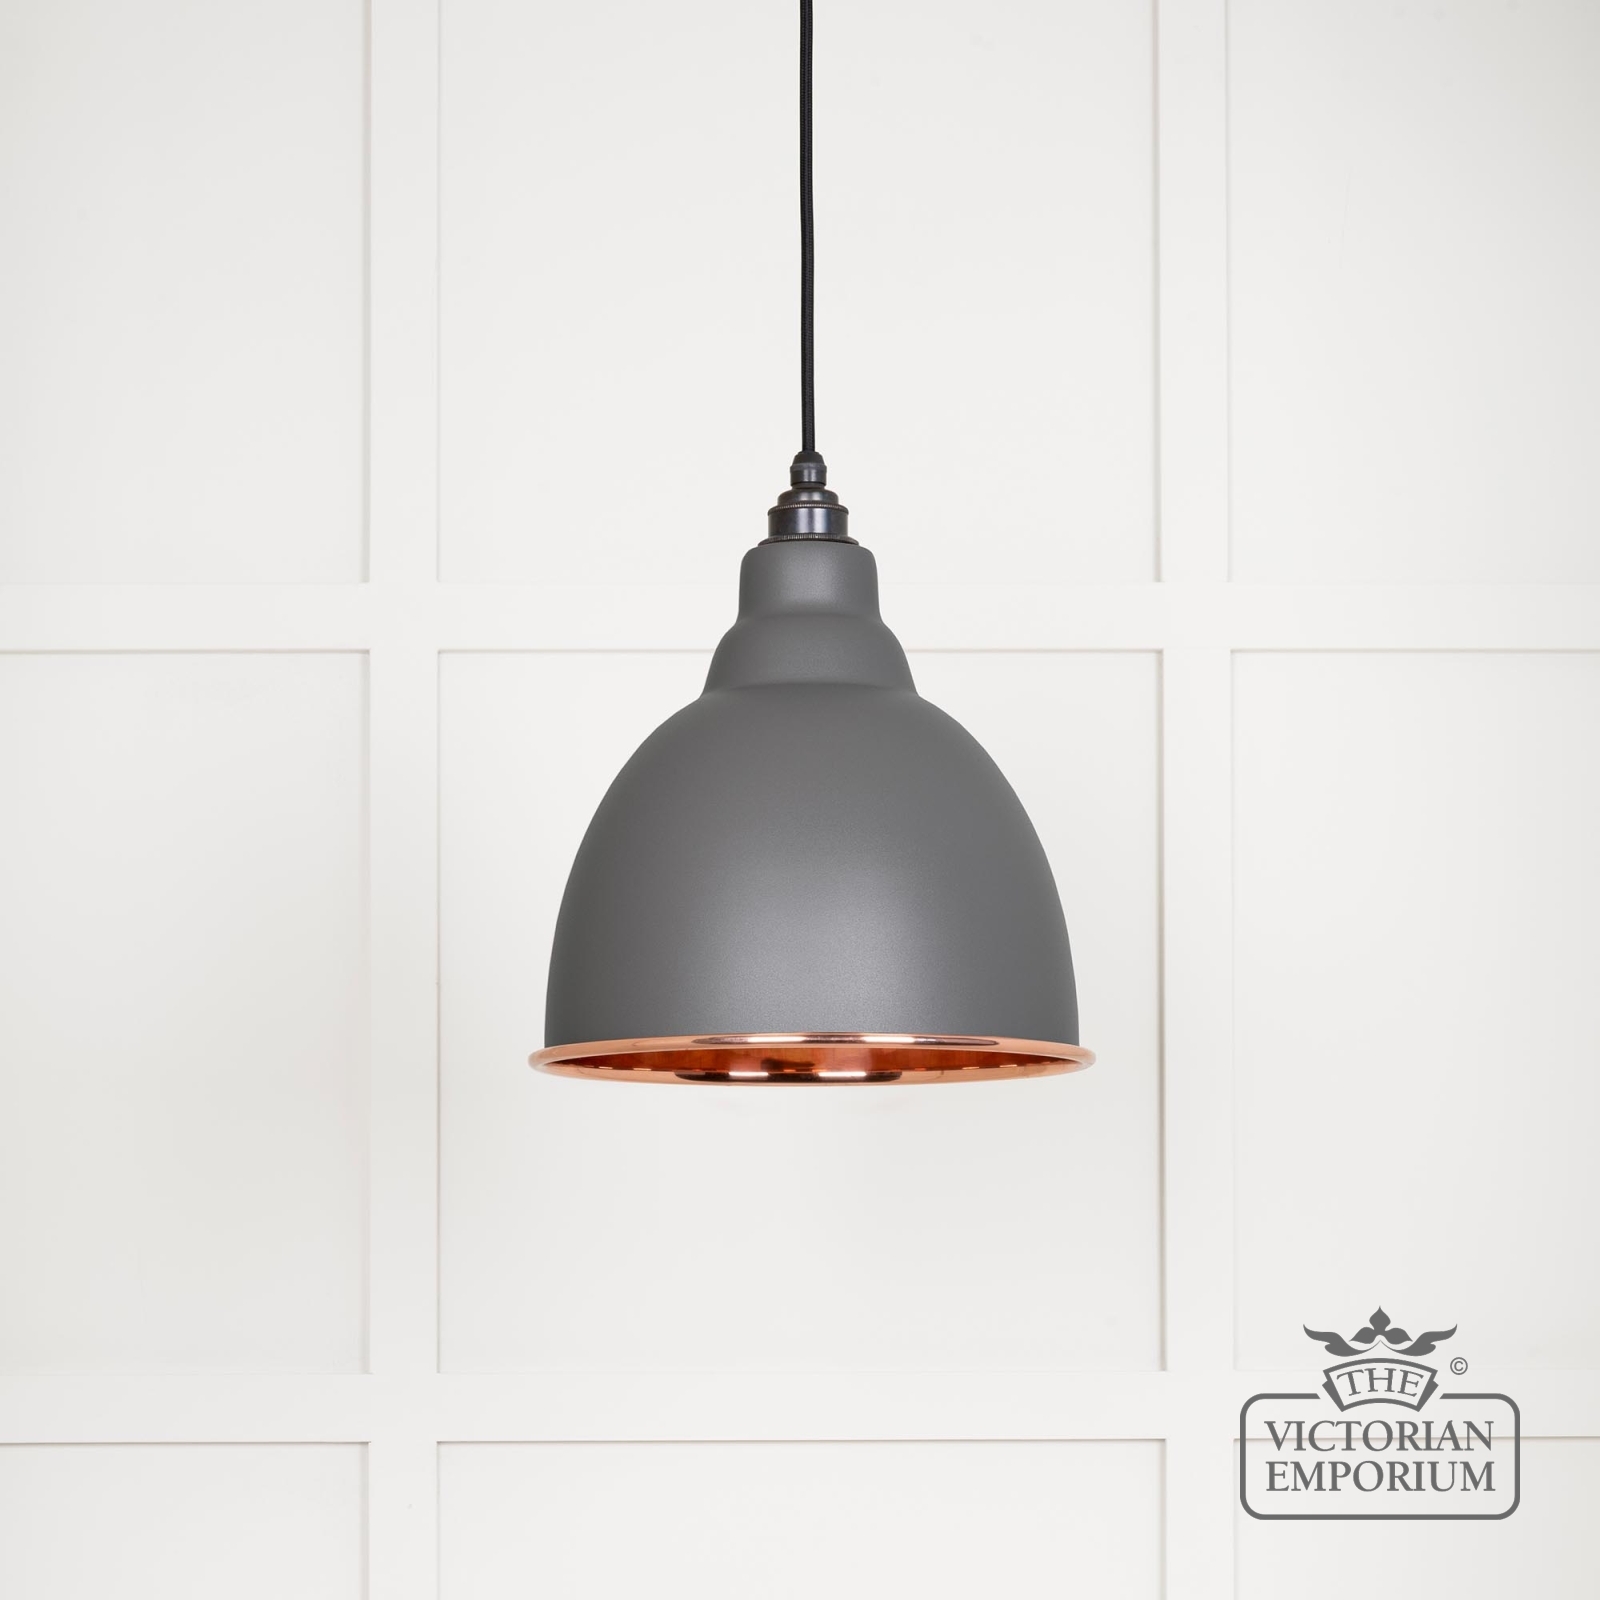 Brindle Pendant Light in Smooth Copper with Bluff Exterior